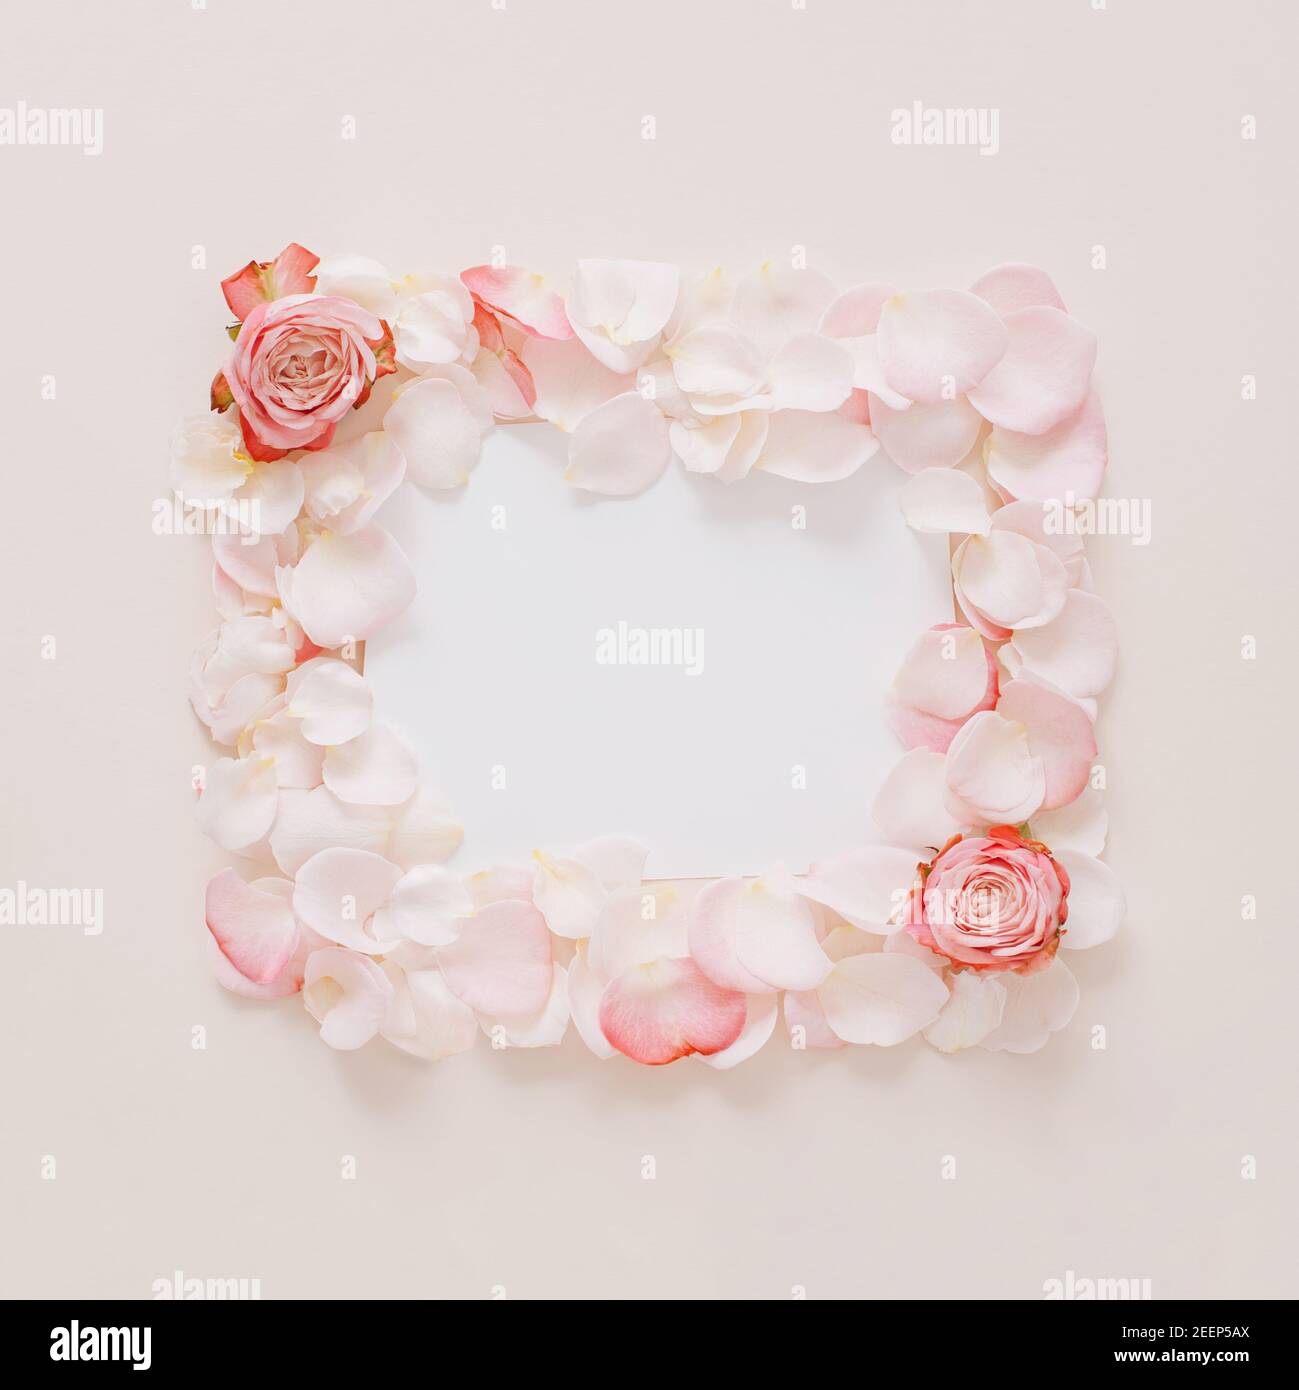 Creative composition made with rose flowers and petals  with paper card note. Minimal nature love background. Spring or summer flowers concept. Stock Photo